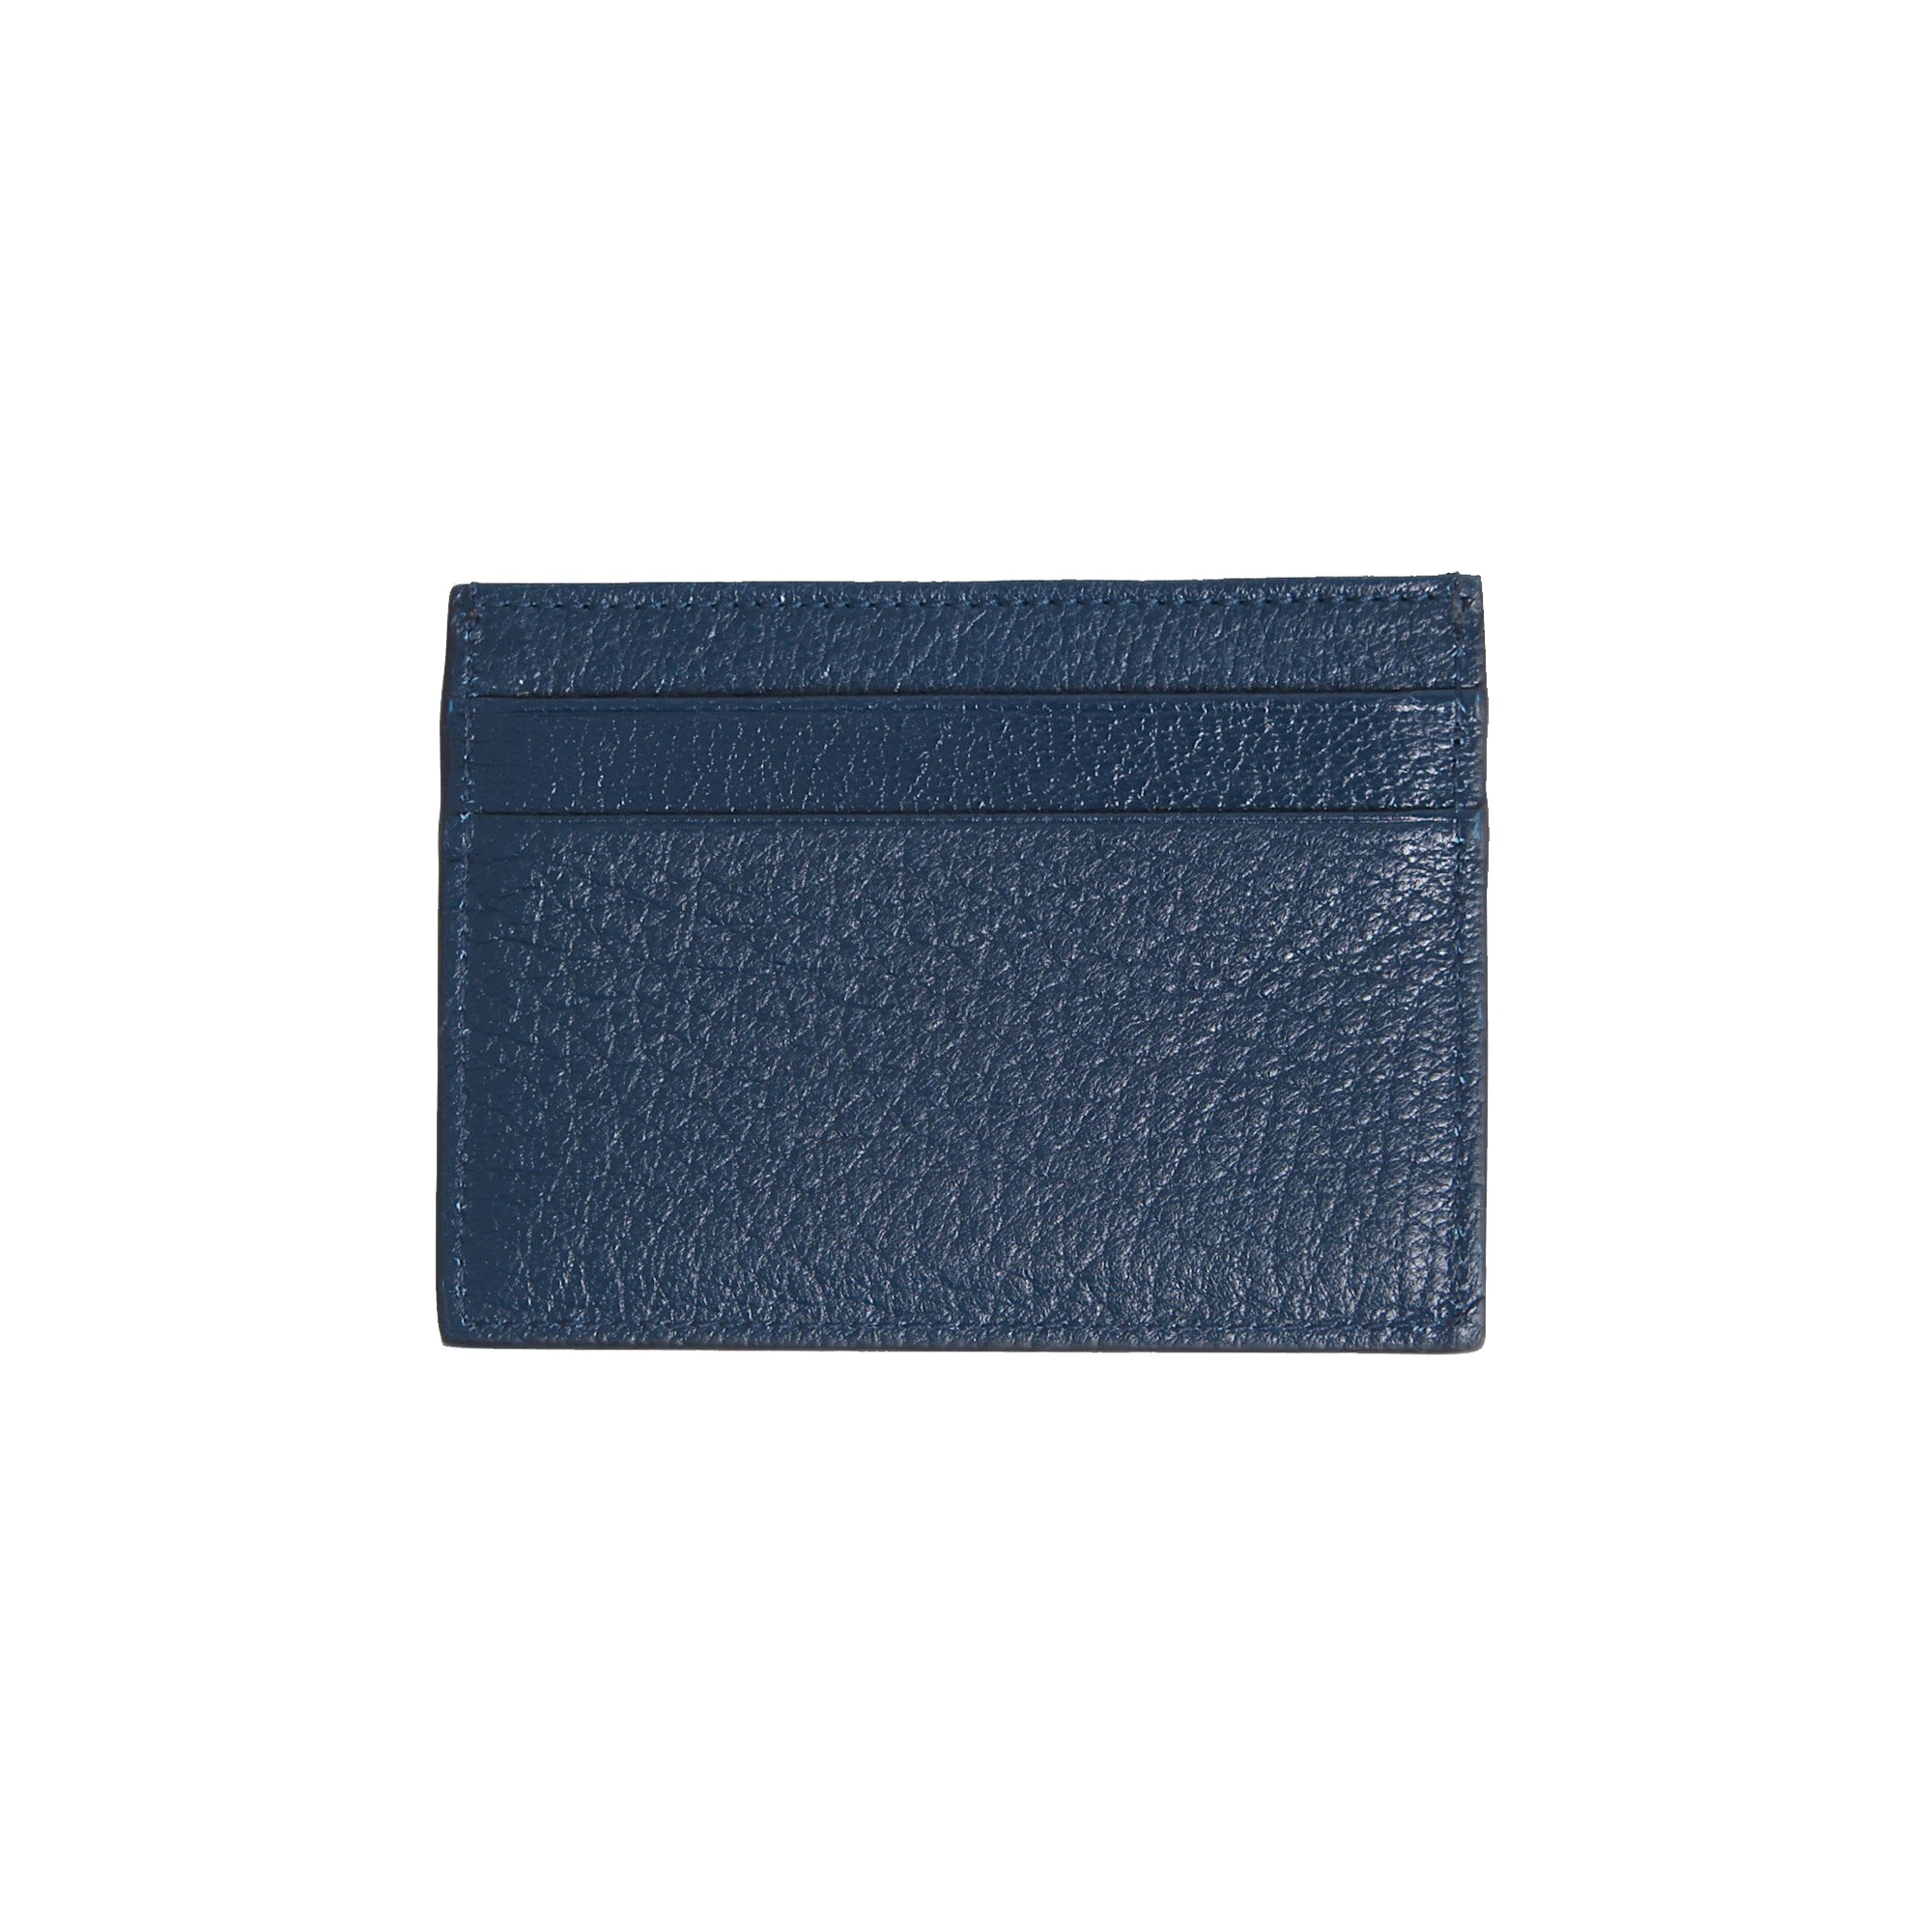 BLUE leather card case